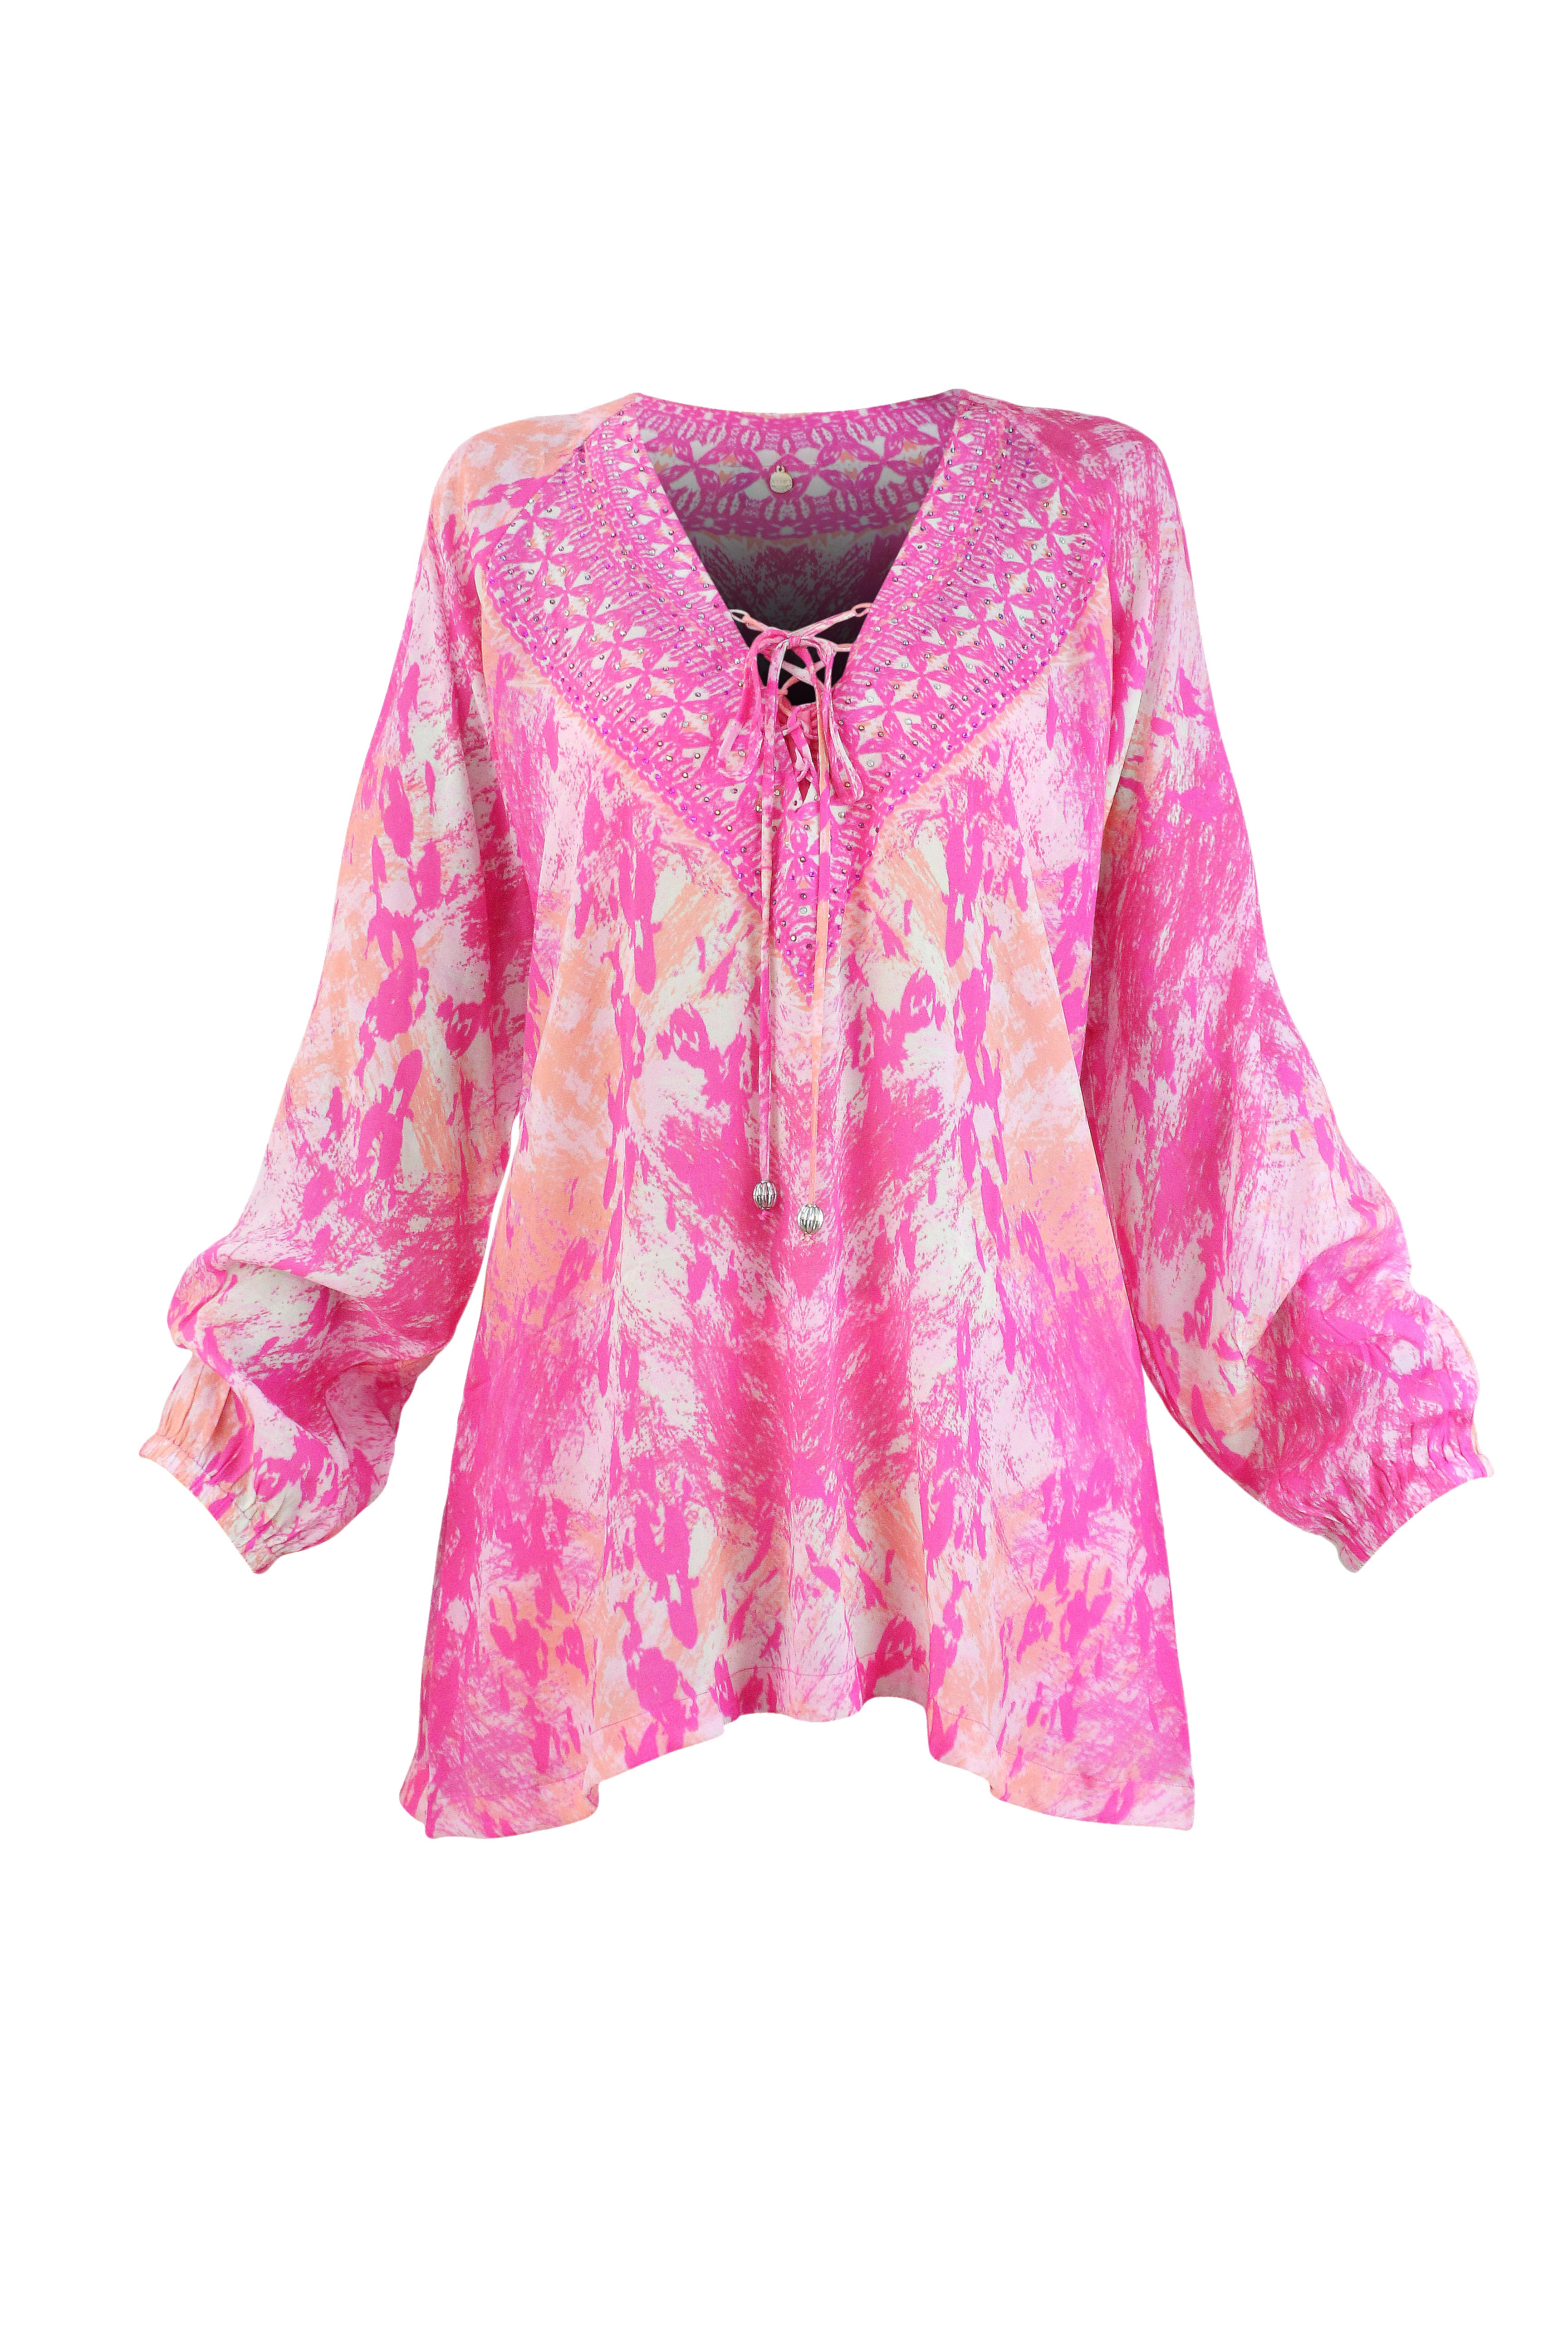 Sunset Skin Laceup Blouse and Short - Resort Collection